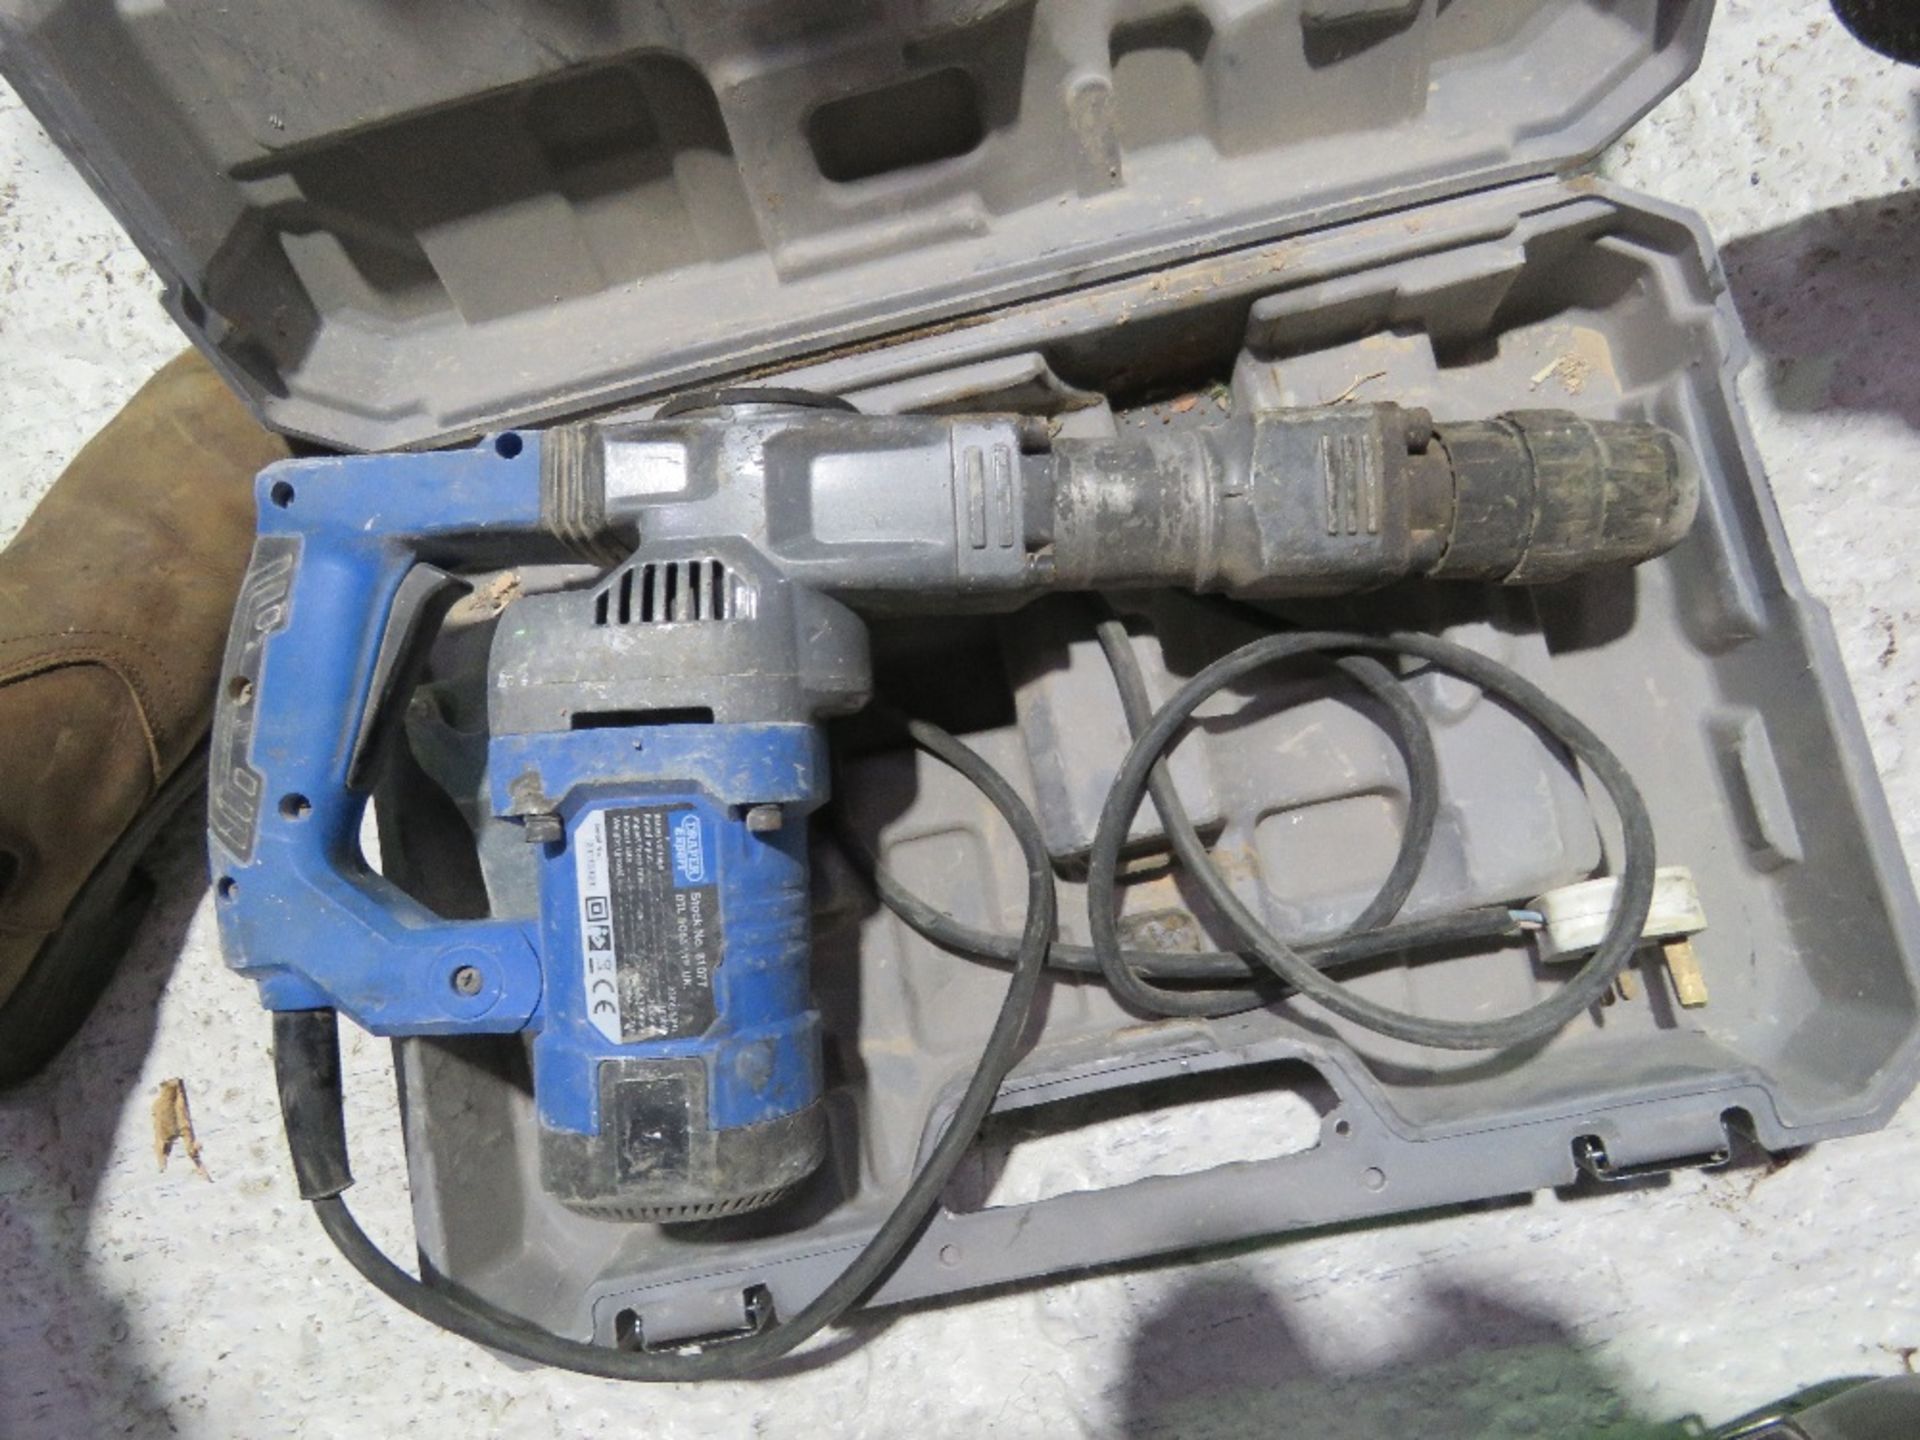 3NO 240 VOLT POWER TOOLS: 2 X DRILLS PLUS A JIGSAW. DIRECT FROM LOCAL RETIRING BUILDER. THIS LO - Image 6 of 7